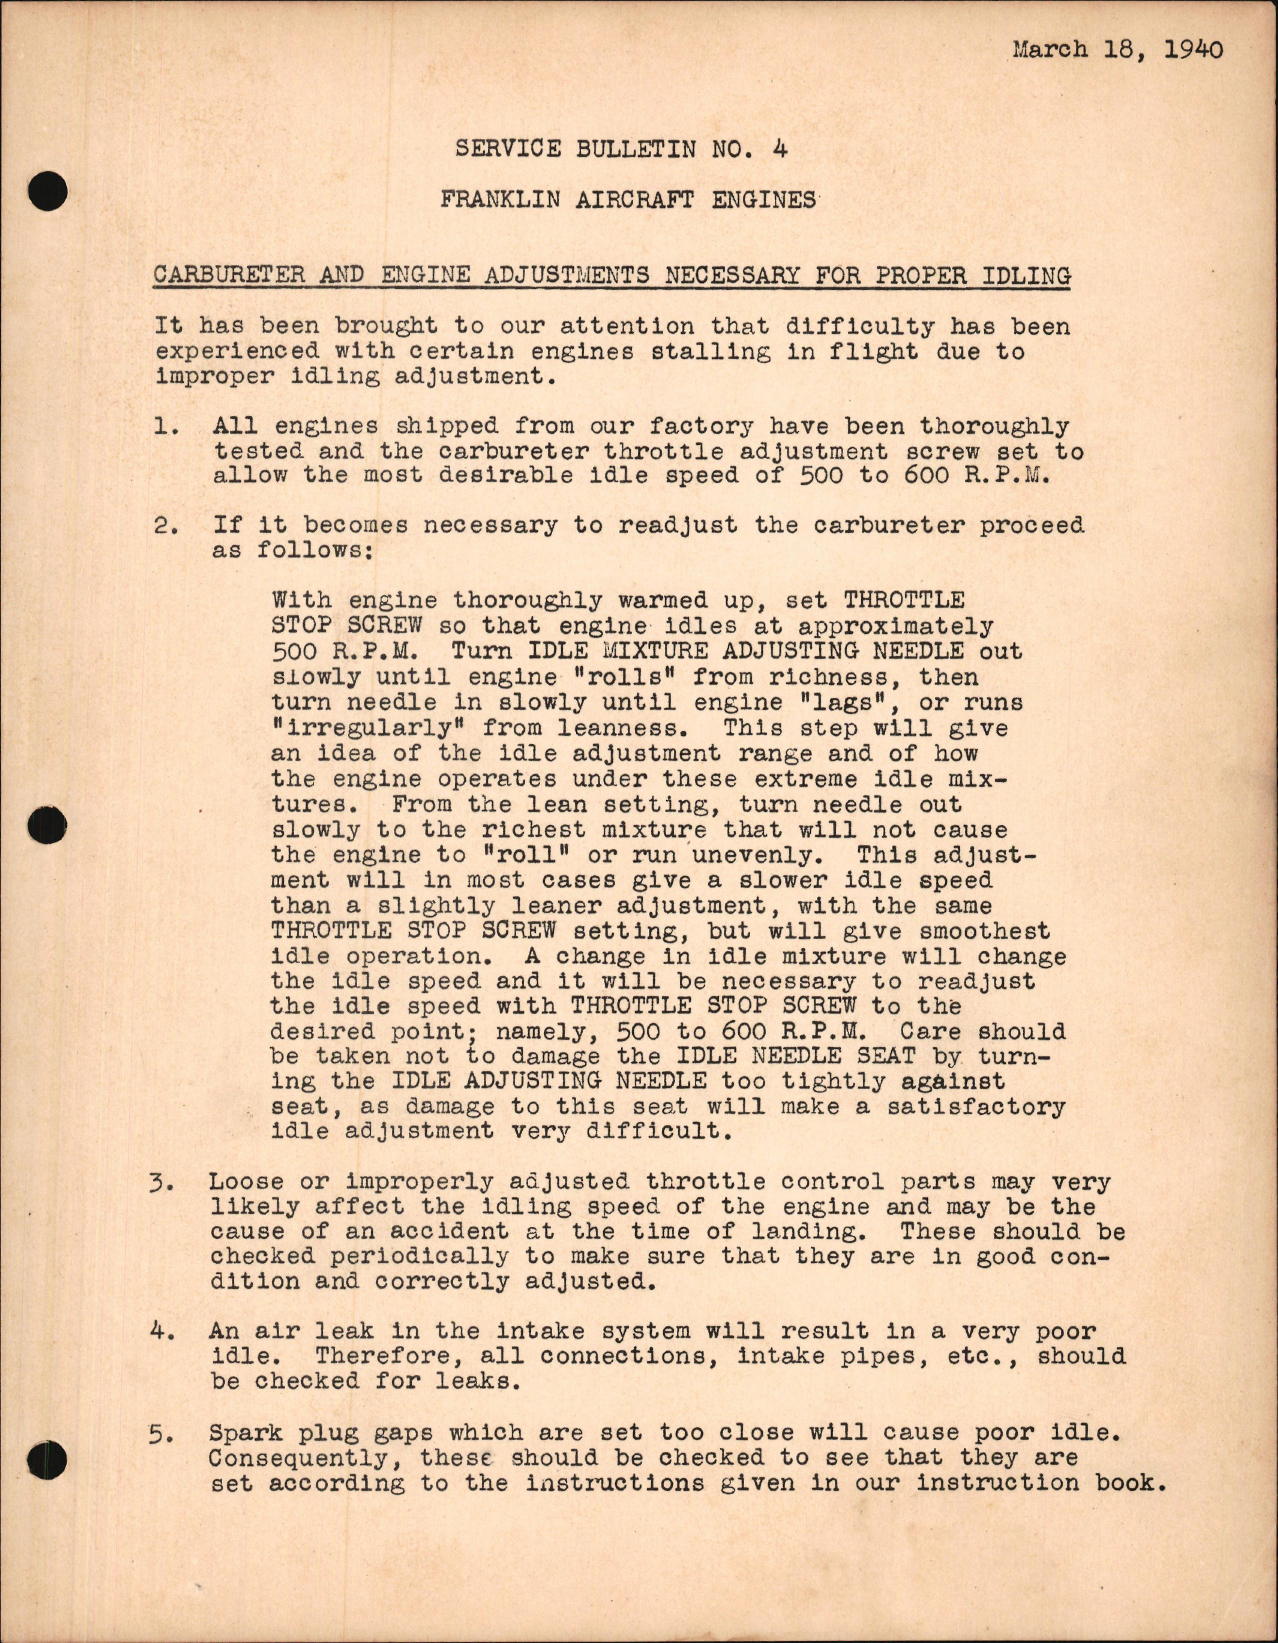 Sample page 1 from AirCorps Library document: Carburetor & Engine Adjustments Necessary for Proper Idling